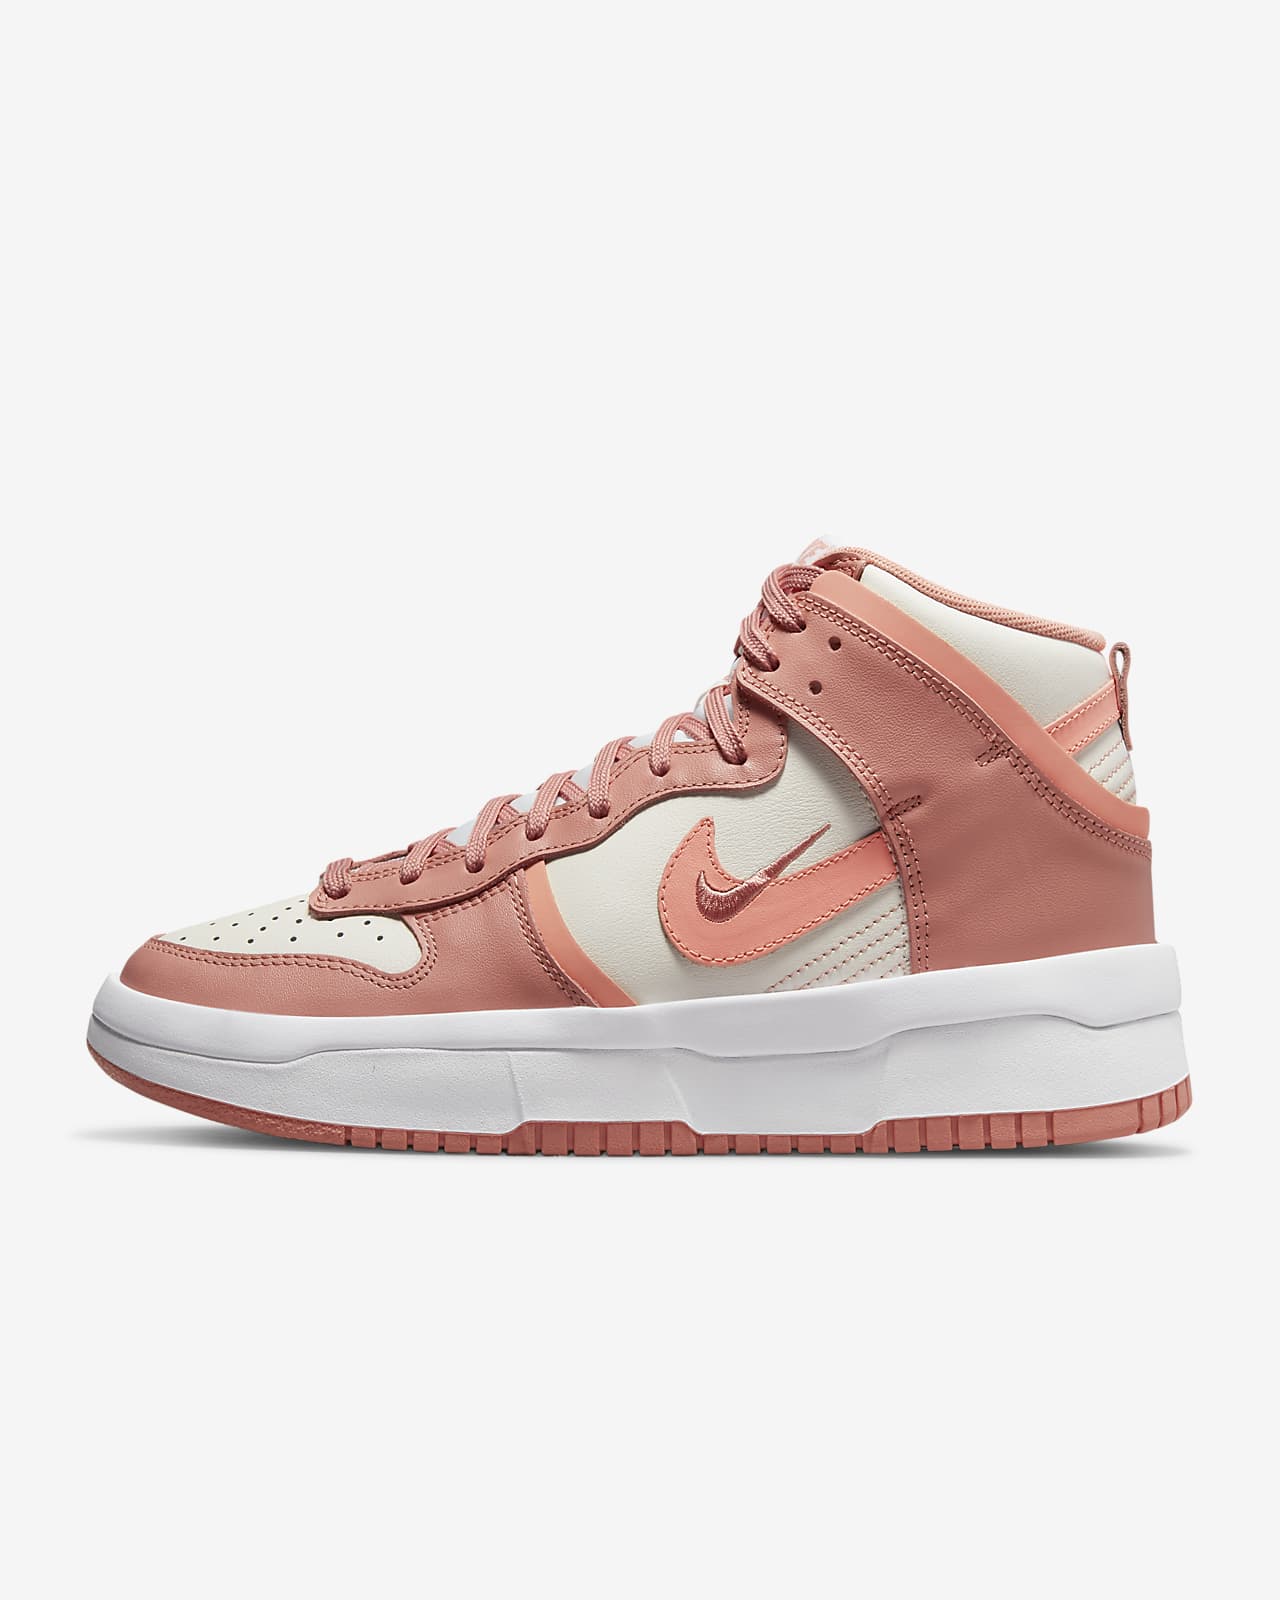 Chaussures Nike Dunk High Up pour Femme